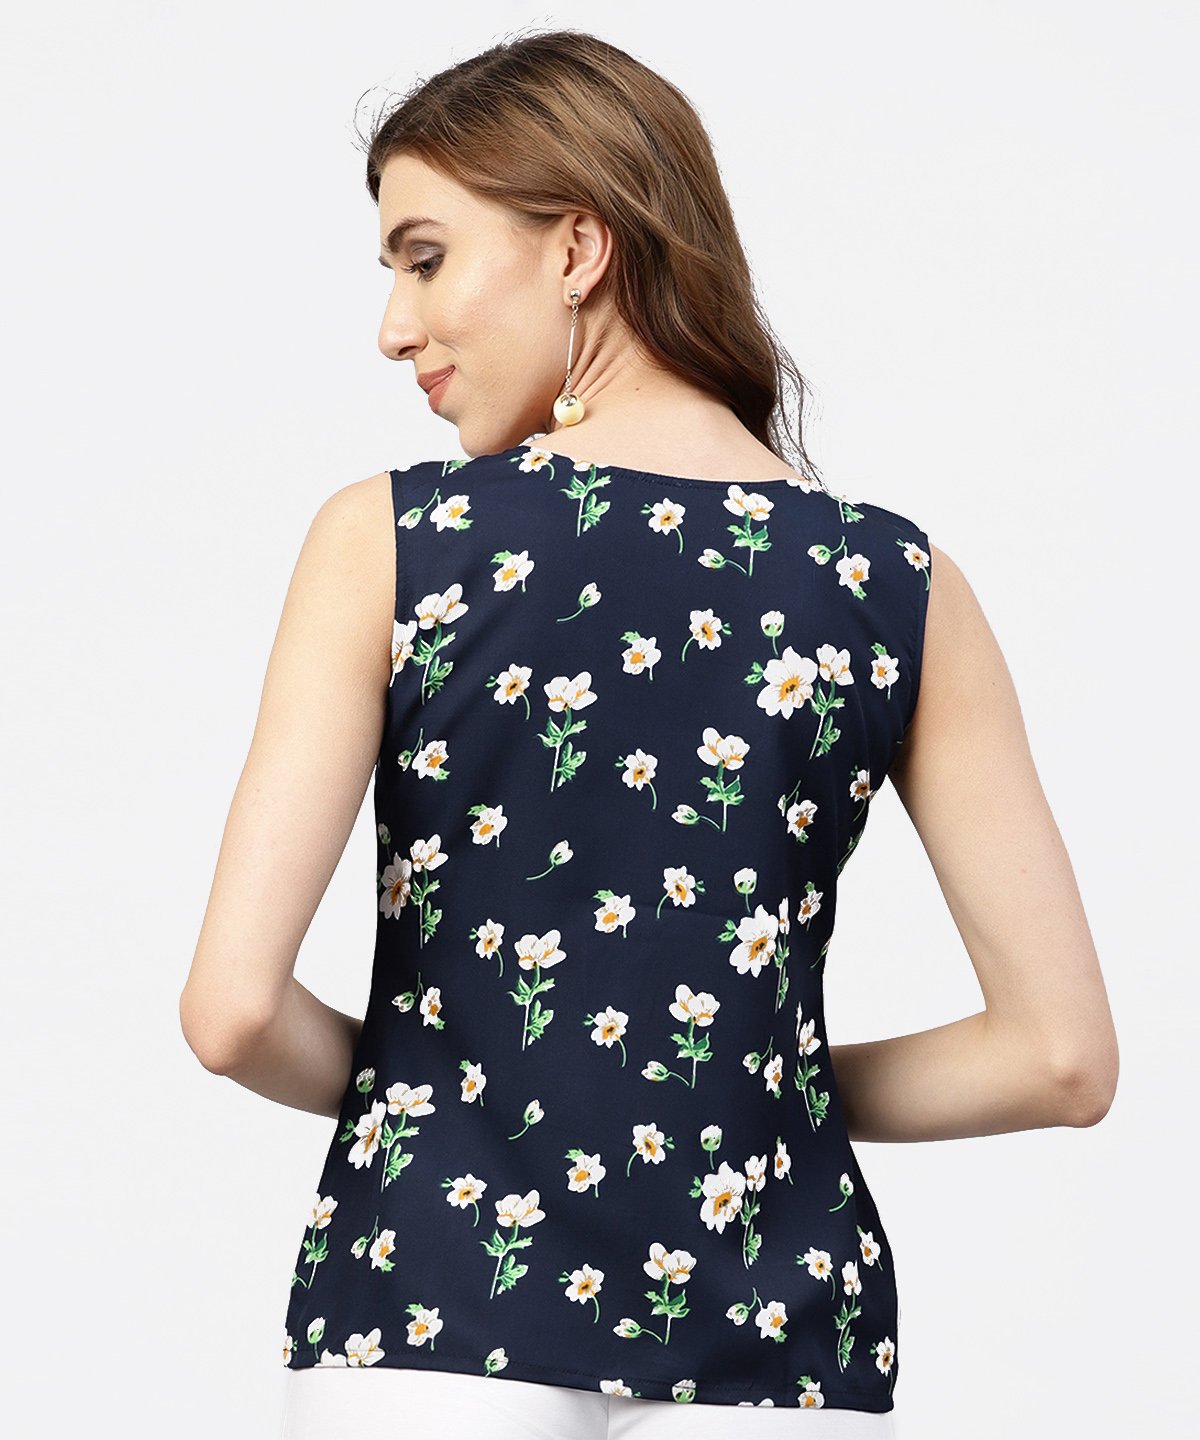 Women's Navy Blue Floral  Printed Sleevless  Top With Front Yoke And V-Neck - Nayo Clothing